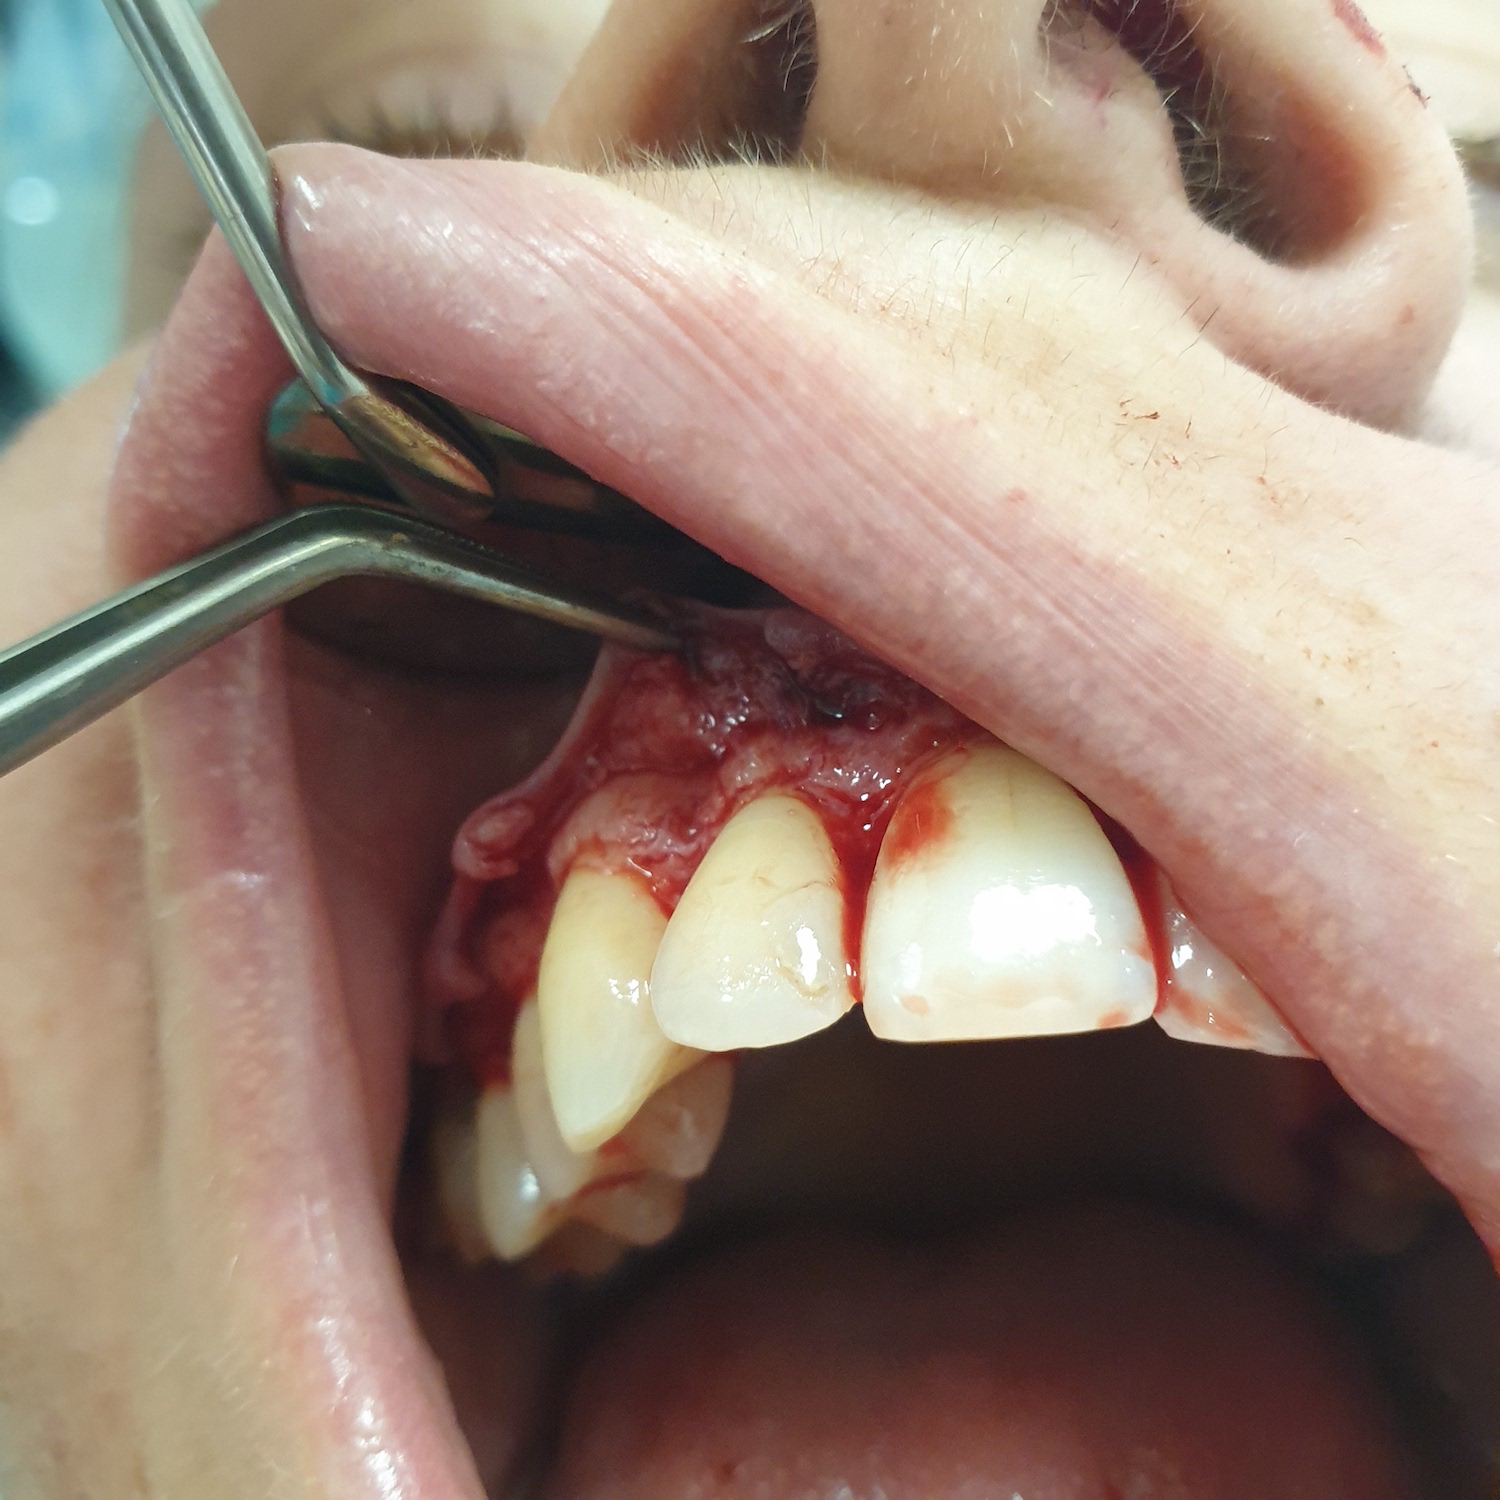 patient no.1: Lobe surgery-The course of gum lifting surgery